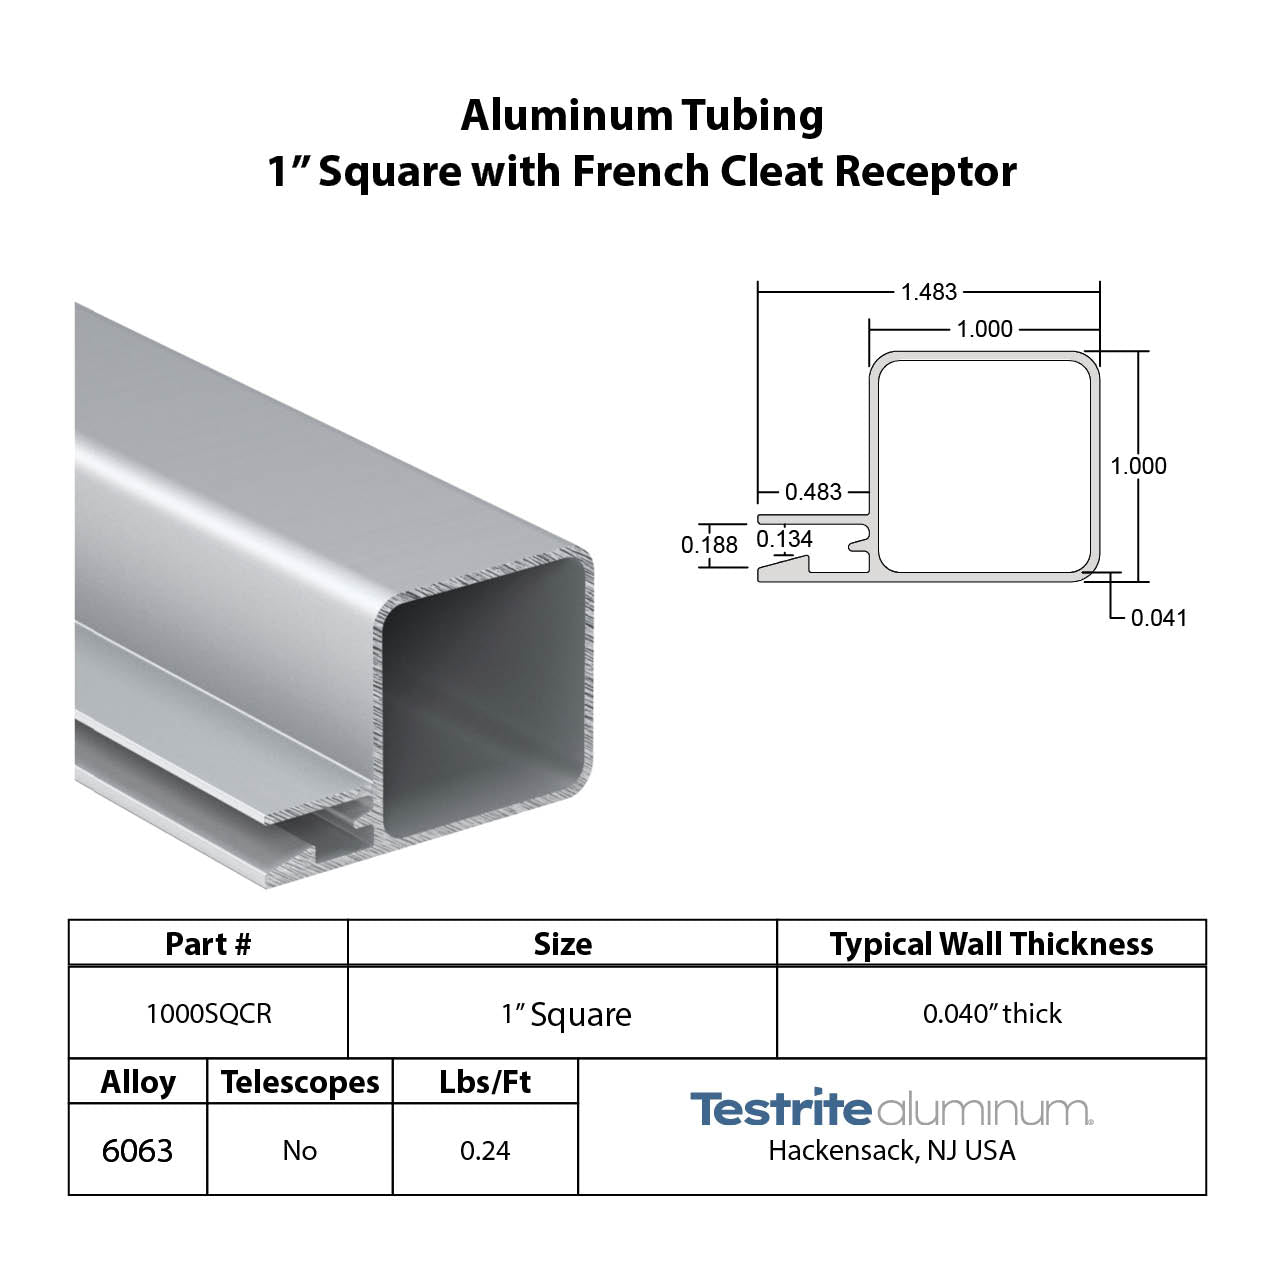 Spec Sheet for 1" Square with French Cleat Receptor, 1" square aluminum tube with graphic channel for 1/8" or .060" media